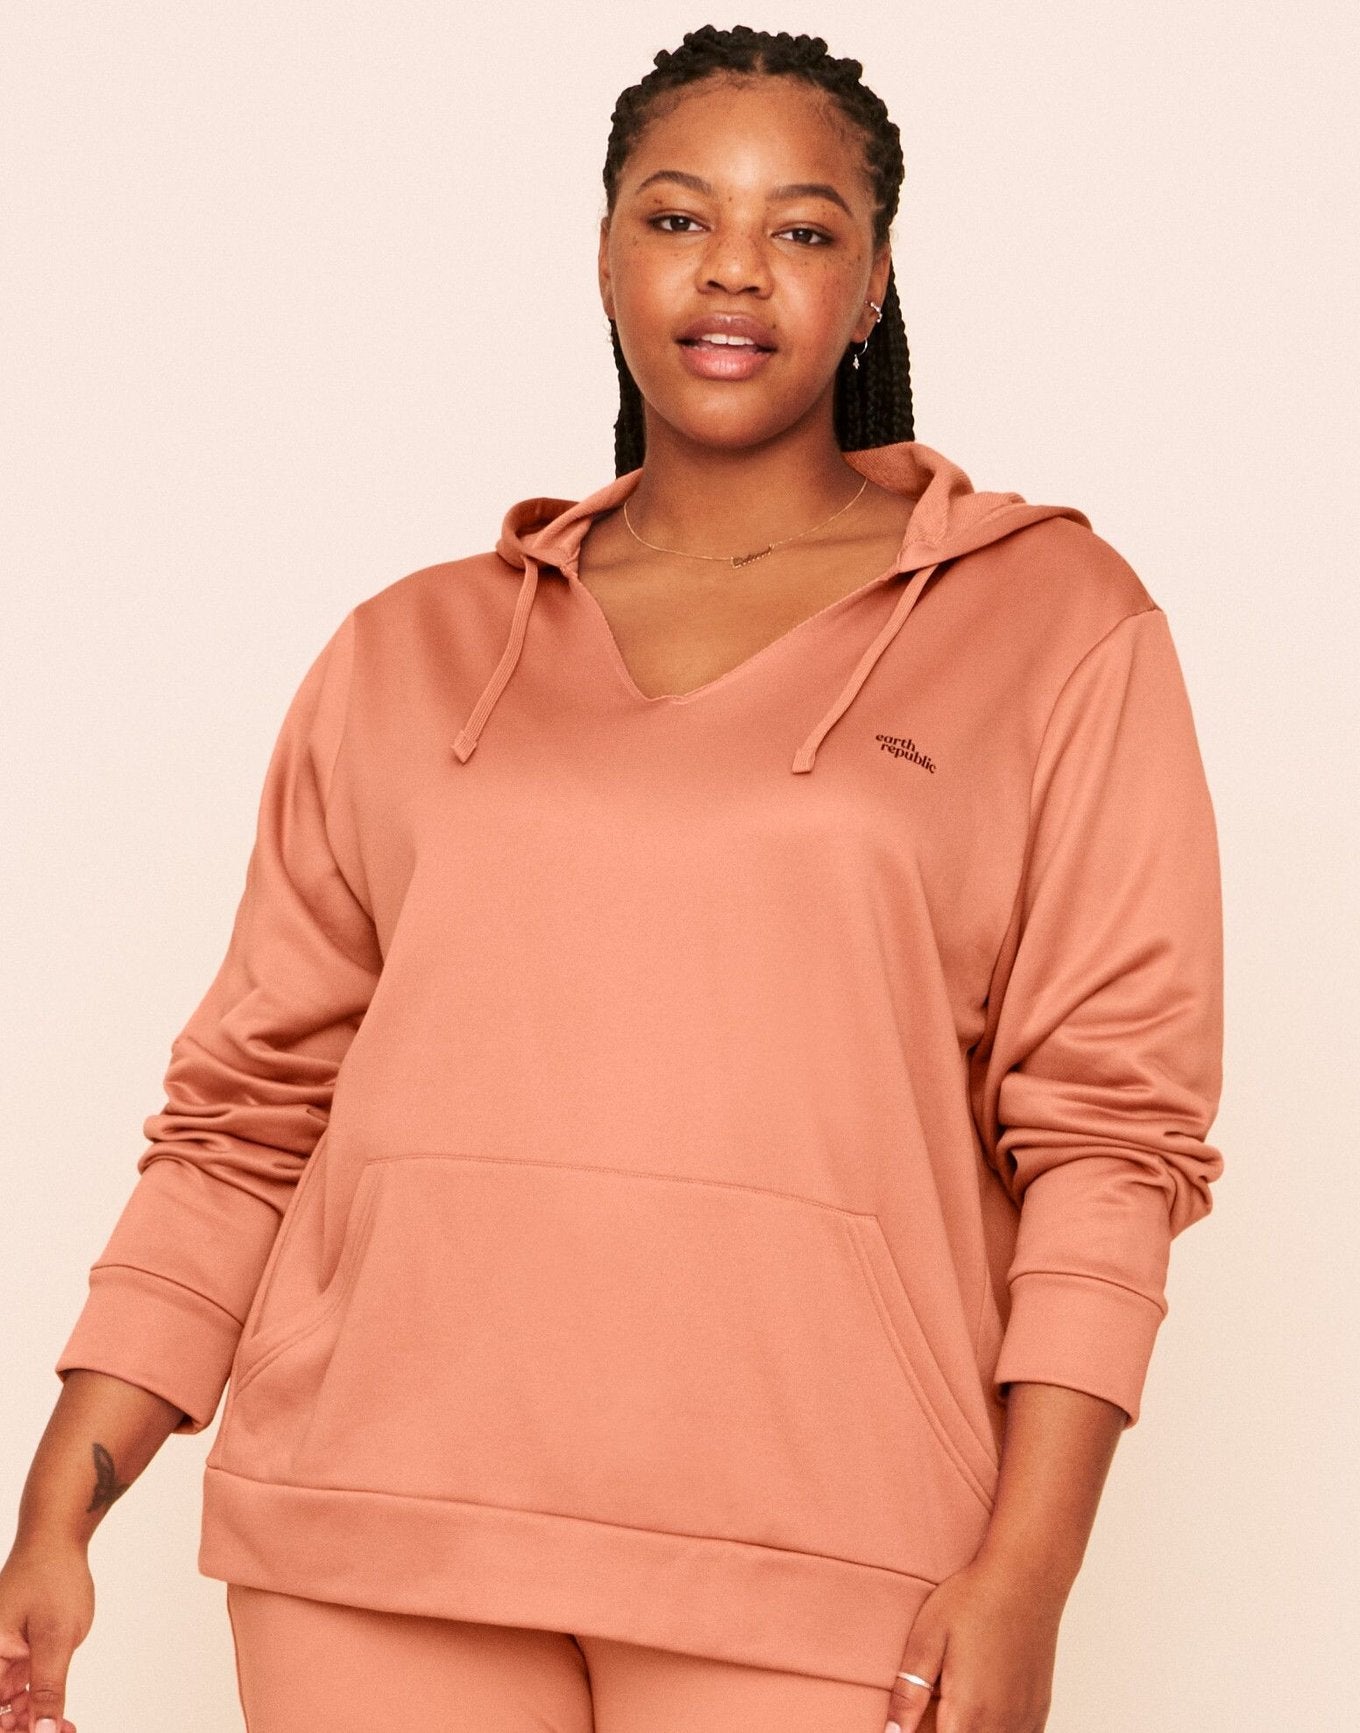 Earth Republic Faye Hooded Pullover Hoodie in color Rhododendron Marl and shape hoodie